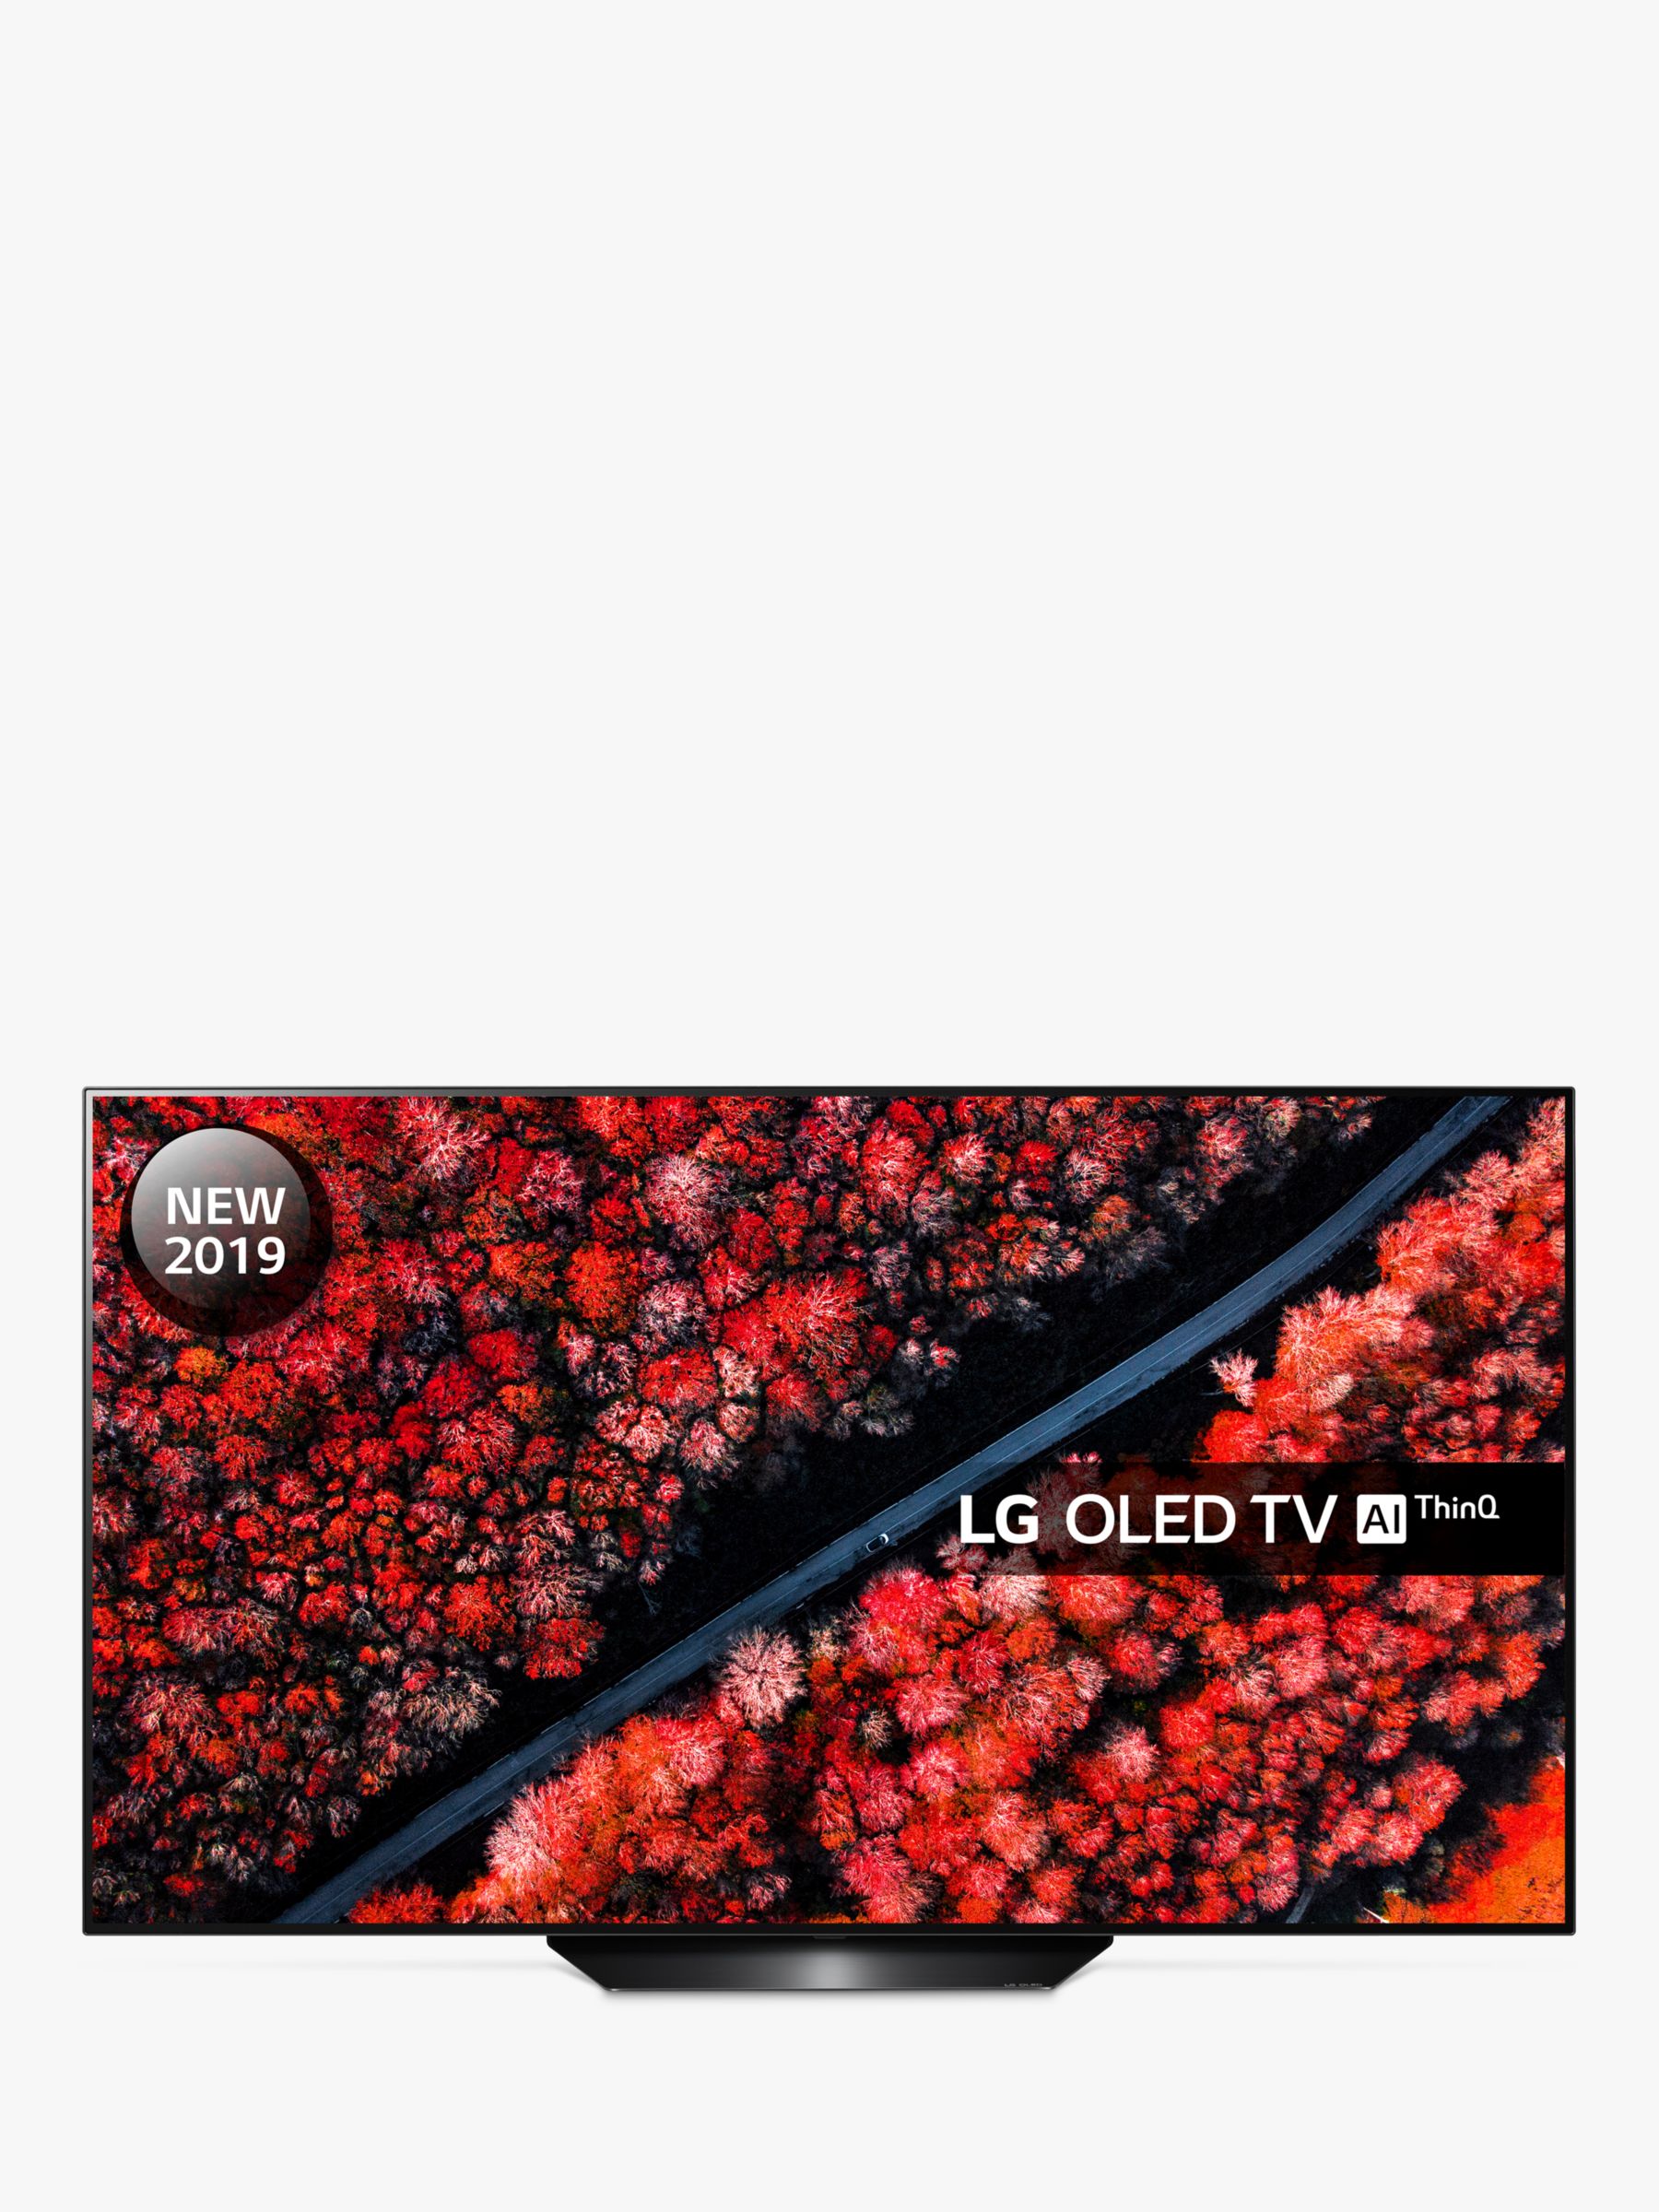 LG OLED65B9PLA (2019) OLED HDR 4K Ultra HD Smart TV, 65" with Freeview Play/Freesat HD, Dolby Atmos & Streamlined Alpine Stand, Ultra HD Certified, Black